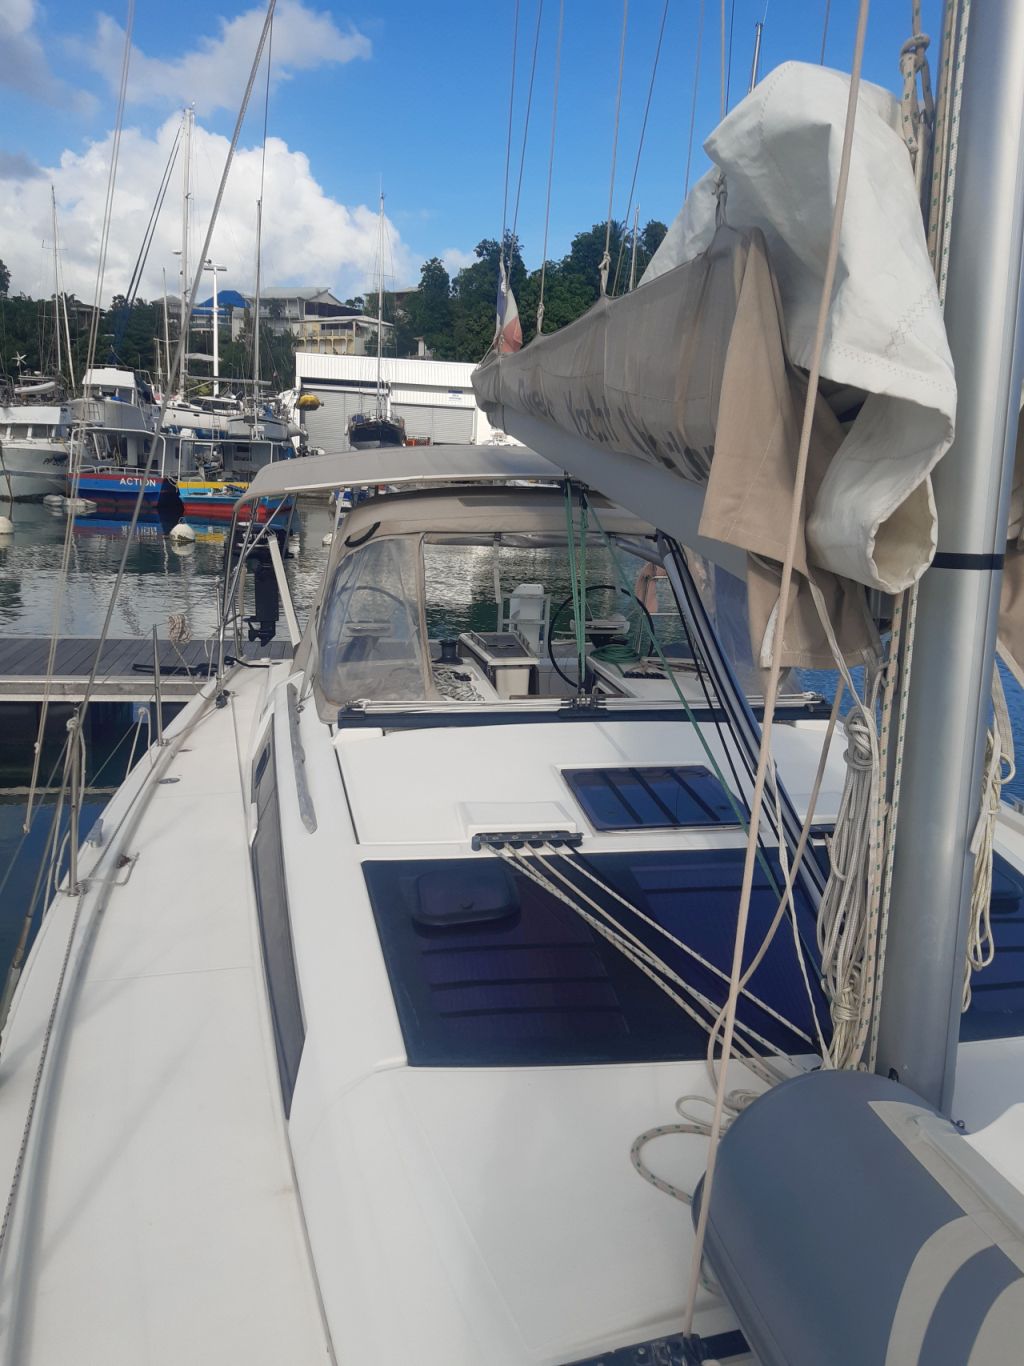 Dufour 390 GL - Yacht Charter Guadeloupe & Boat hire in Guadeloupe Pointe a Pitre Marina de Bas du Fort 4